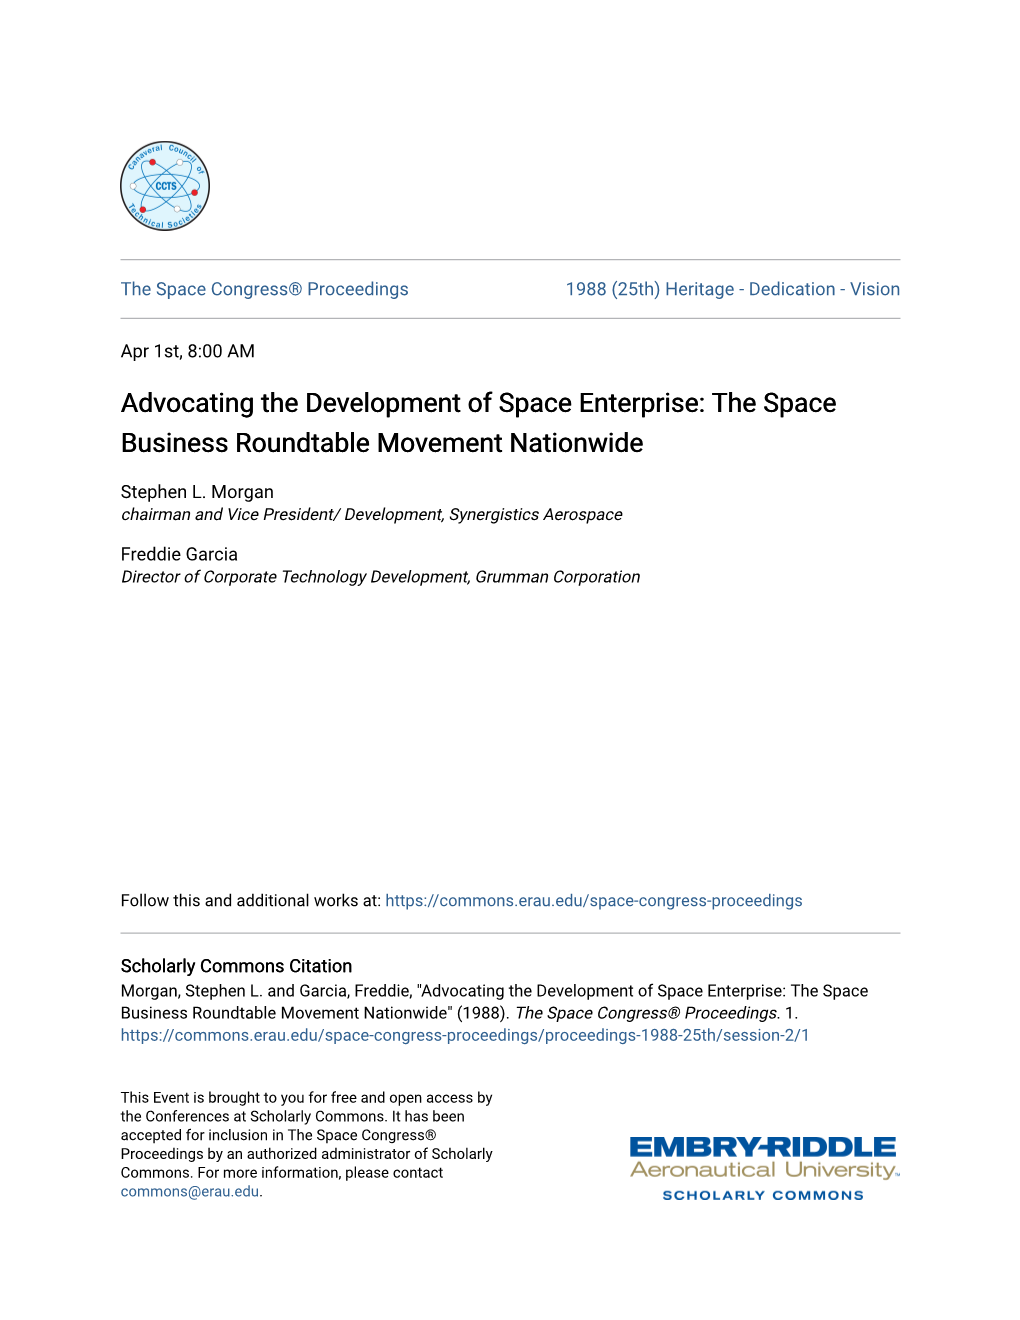 The Space Business Roundtable Movement Nationwide